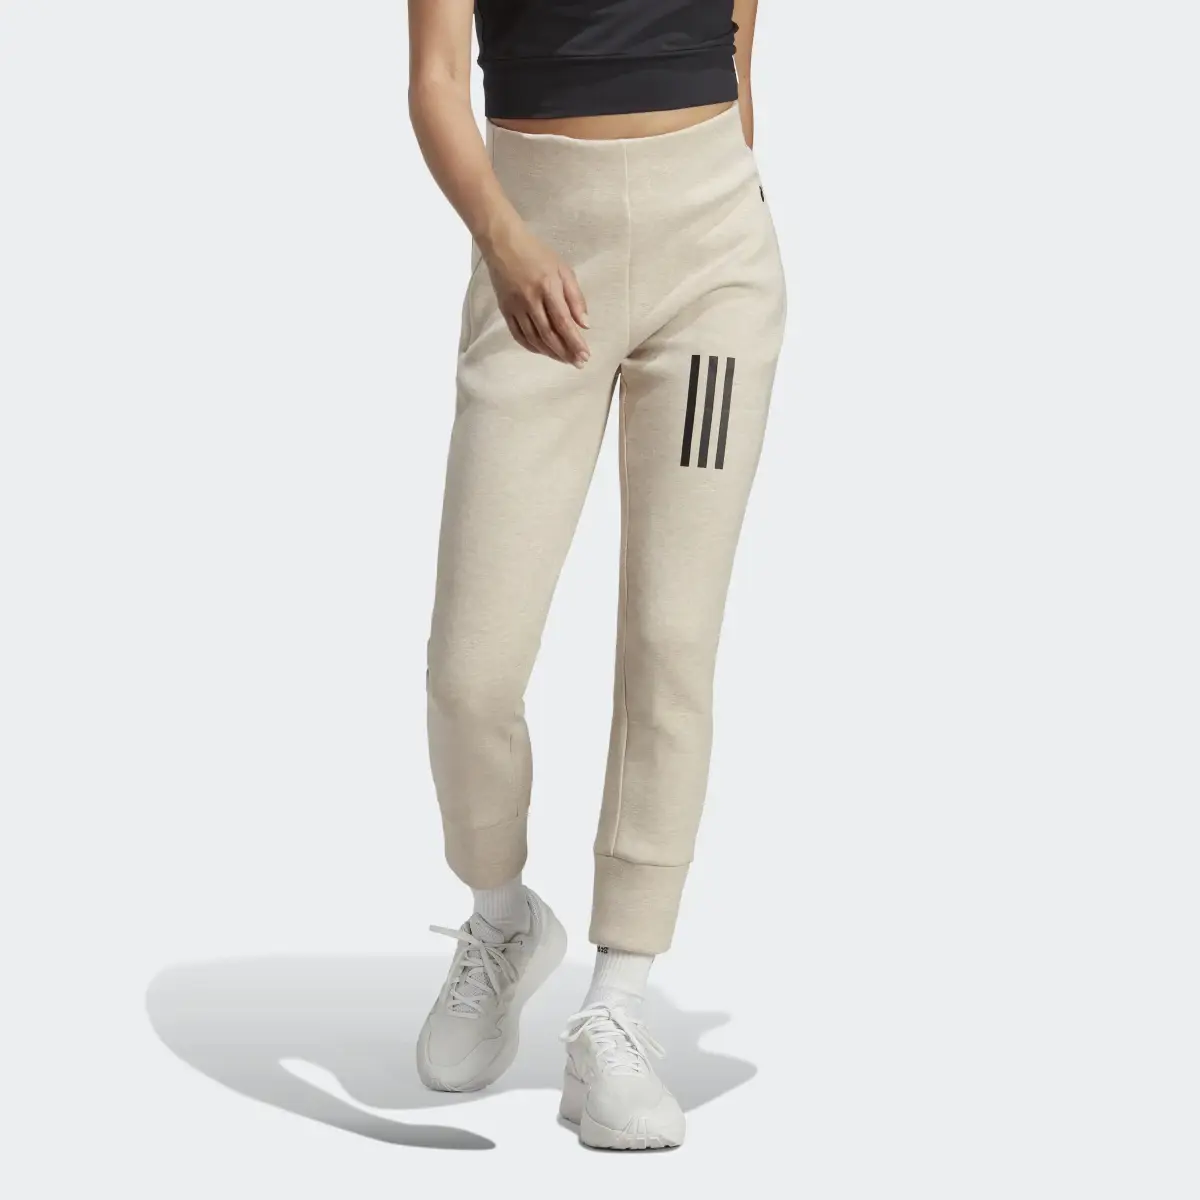 Adidas Mission Victory High-Waist 7/8 Tracksuit Bottoms. 1